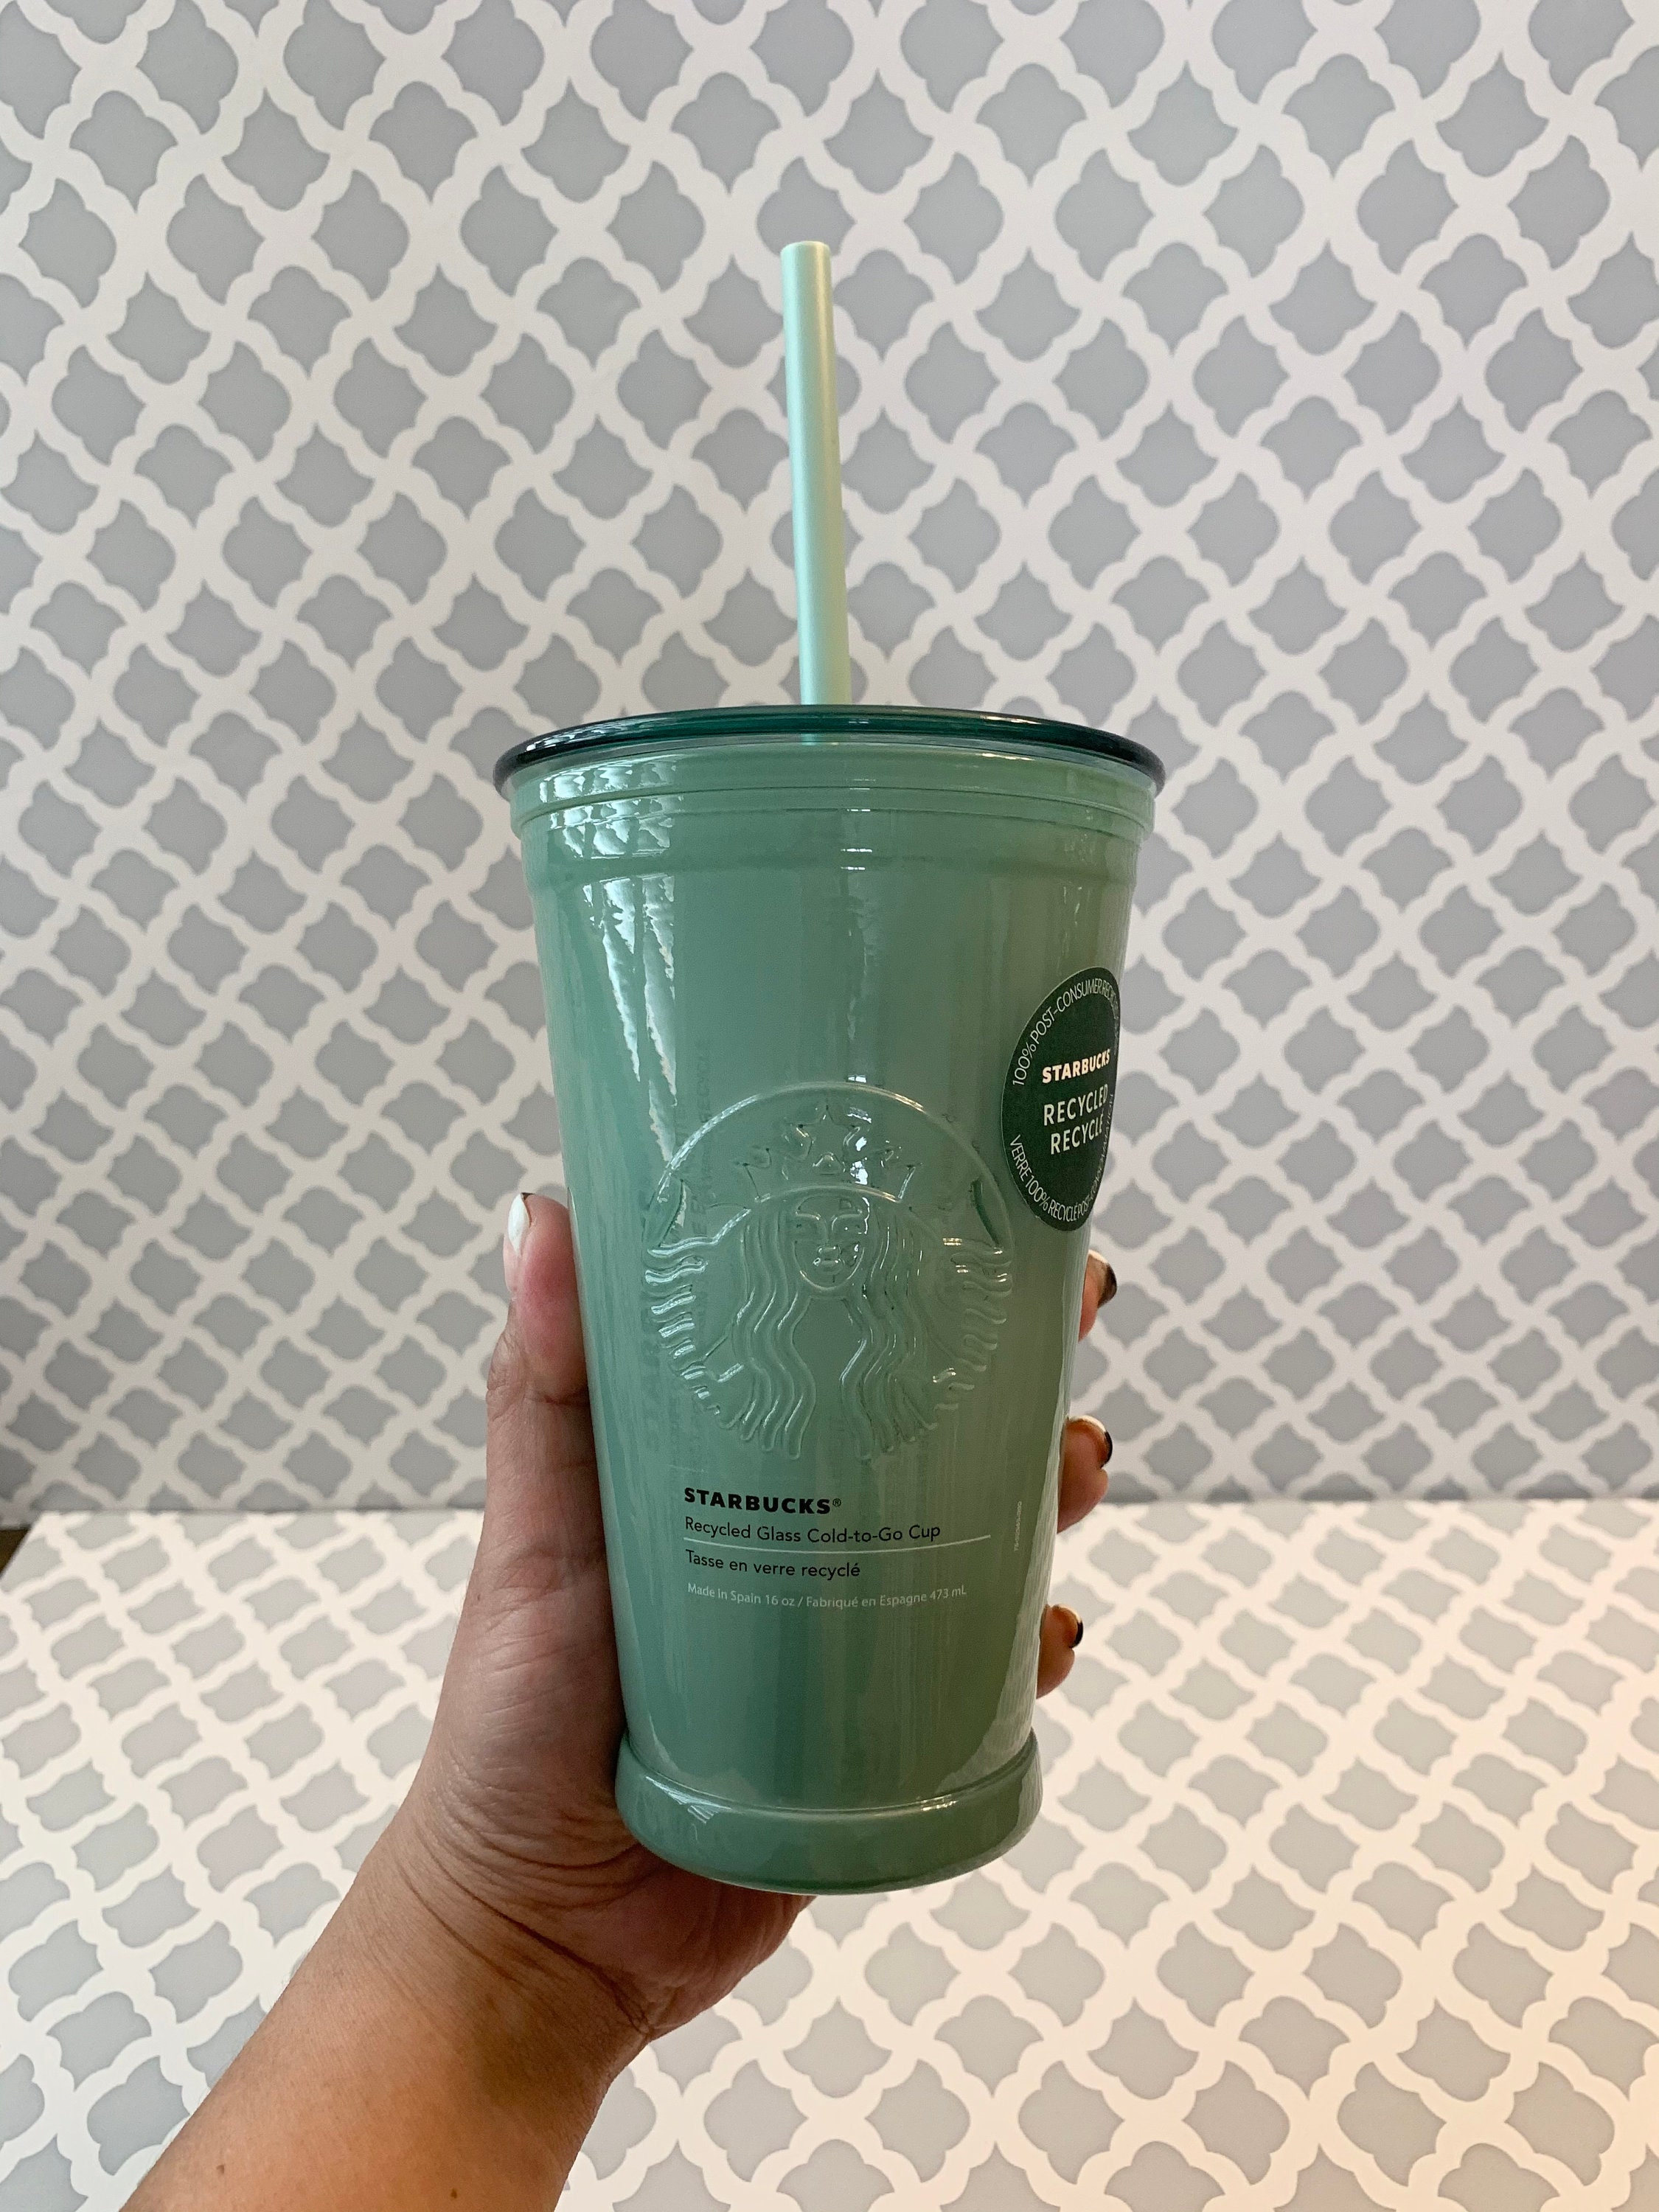 My absolute favorite cold drink cup! #starbucks #recycle #glass #recyc